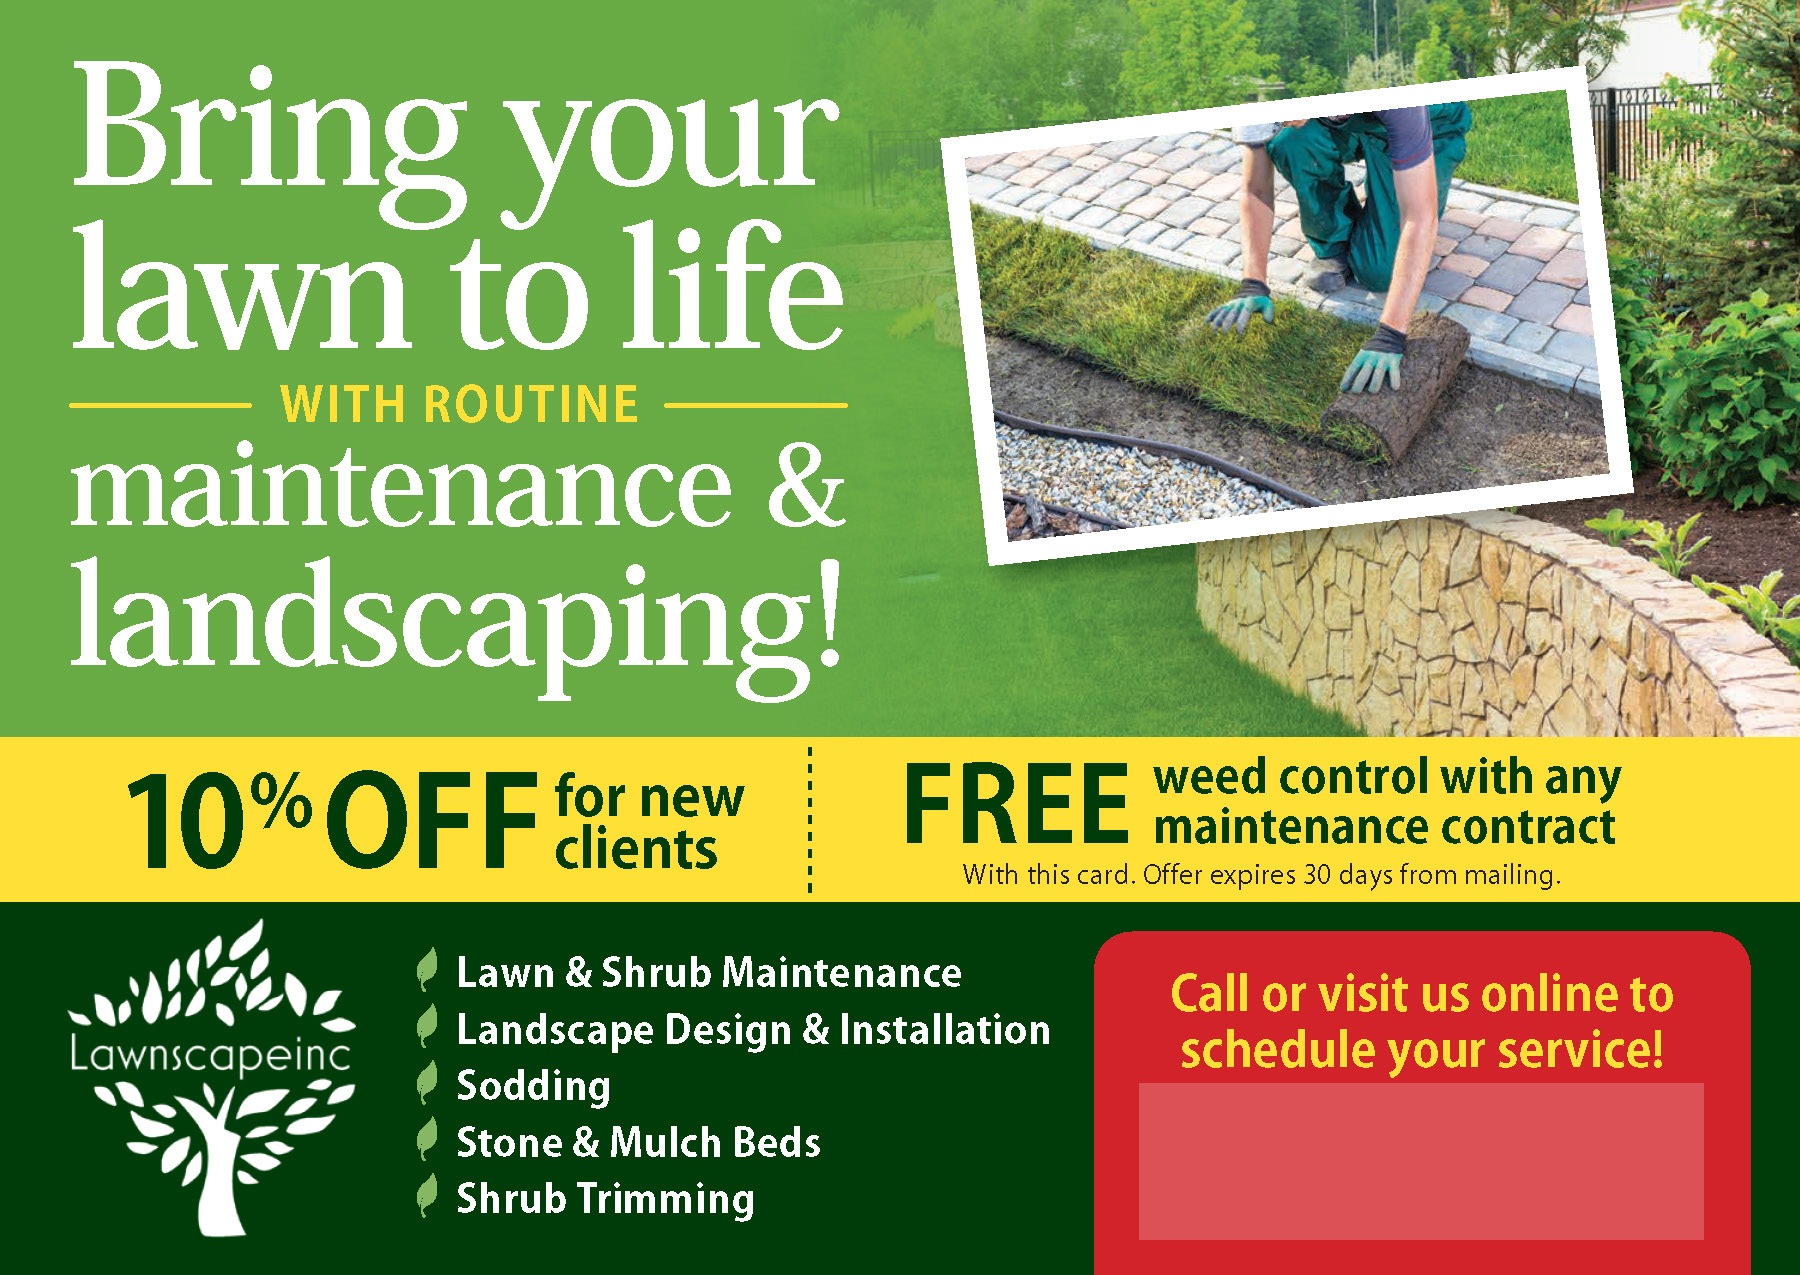 Successful Landscaping Postcard Campaign